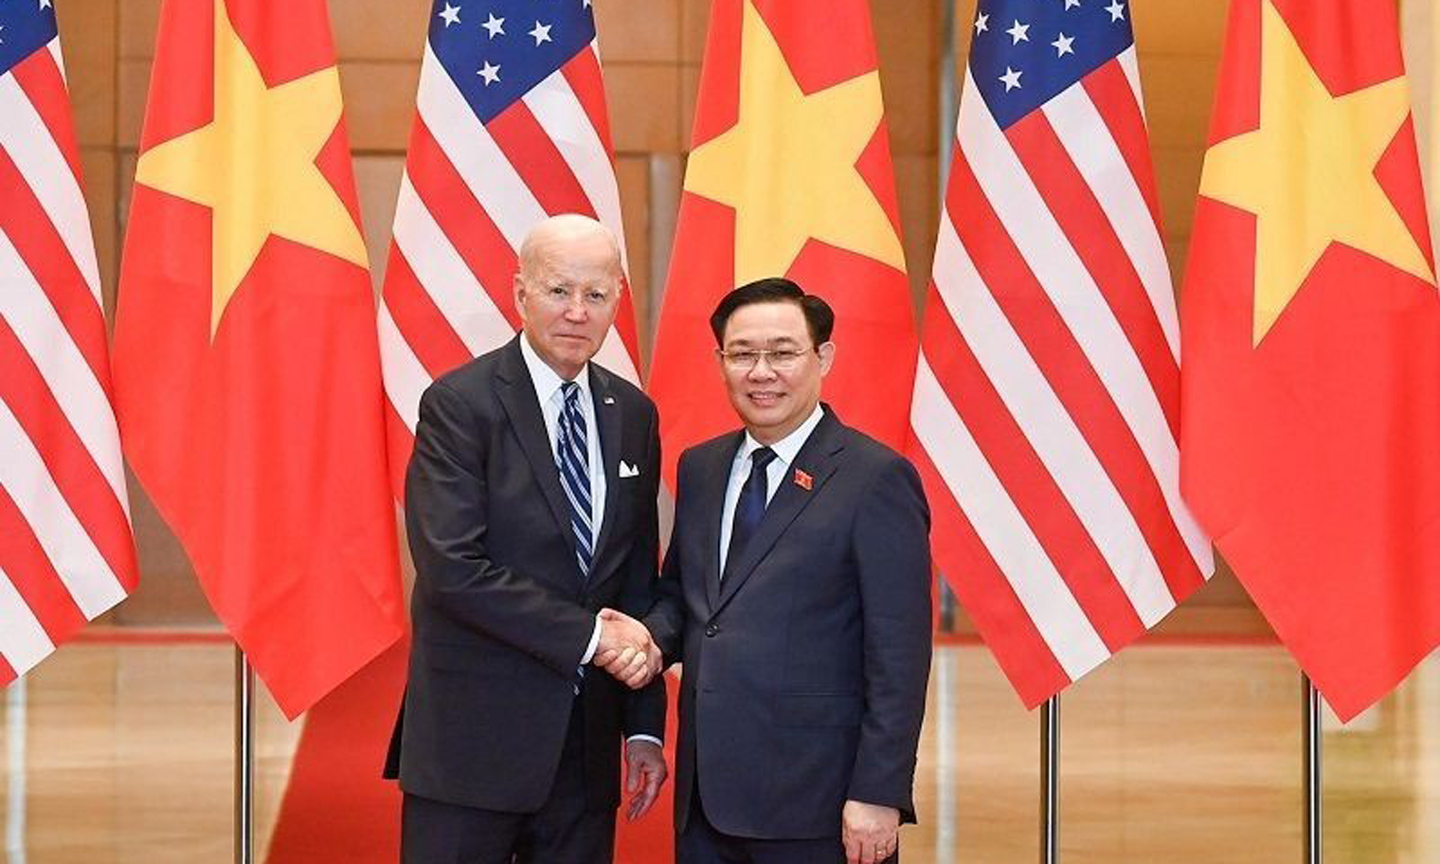 ABO/NDO- Chairman of the National Assembly (NA) Vuong Dinh Hue met with US President Joseph Robinette Biden Jr. in Hanoi on the afternoon of September 11.